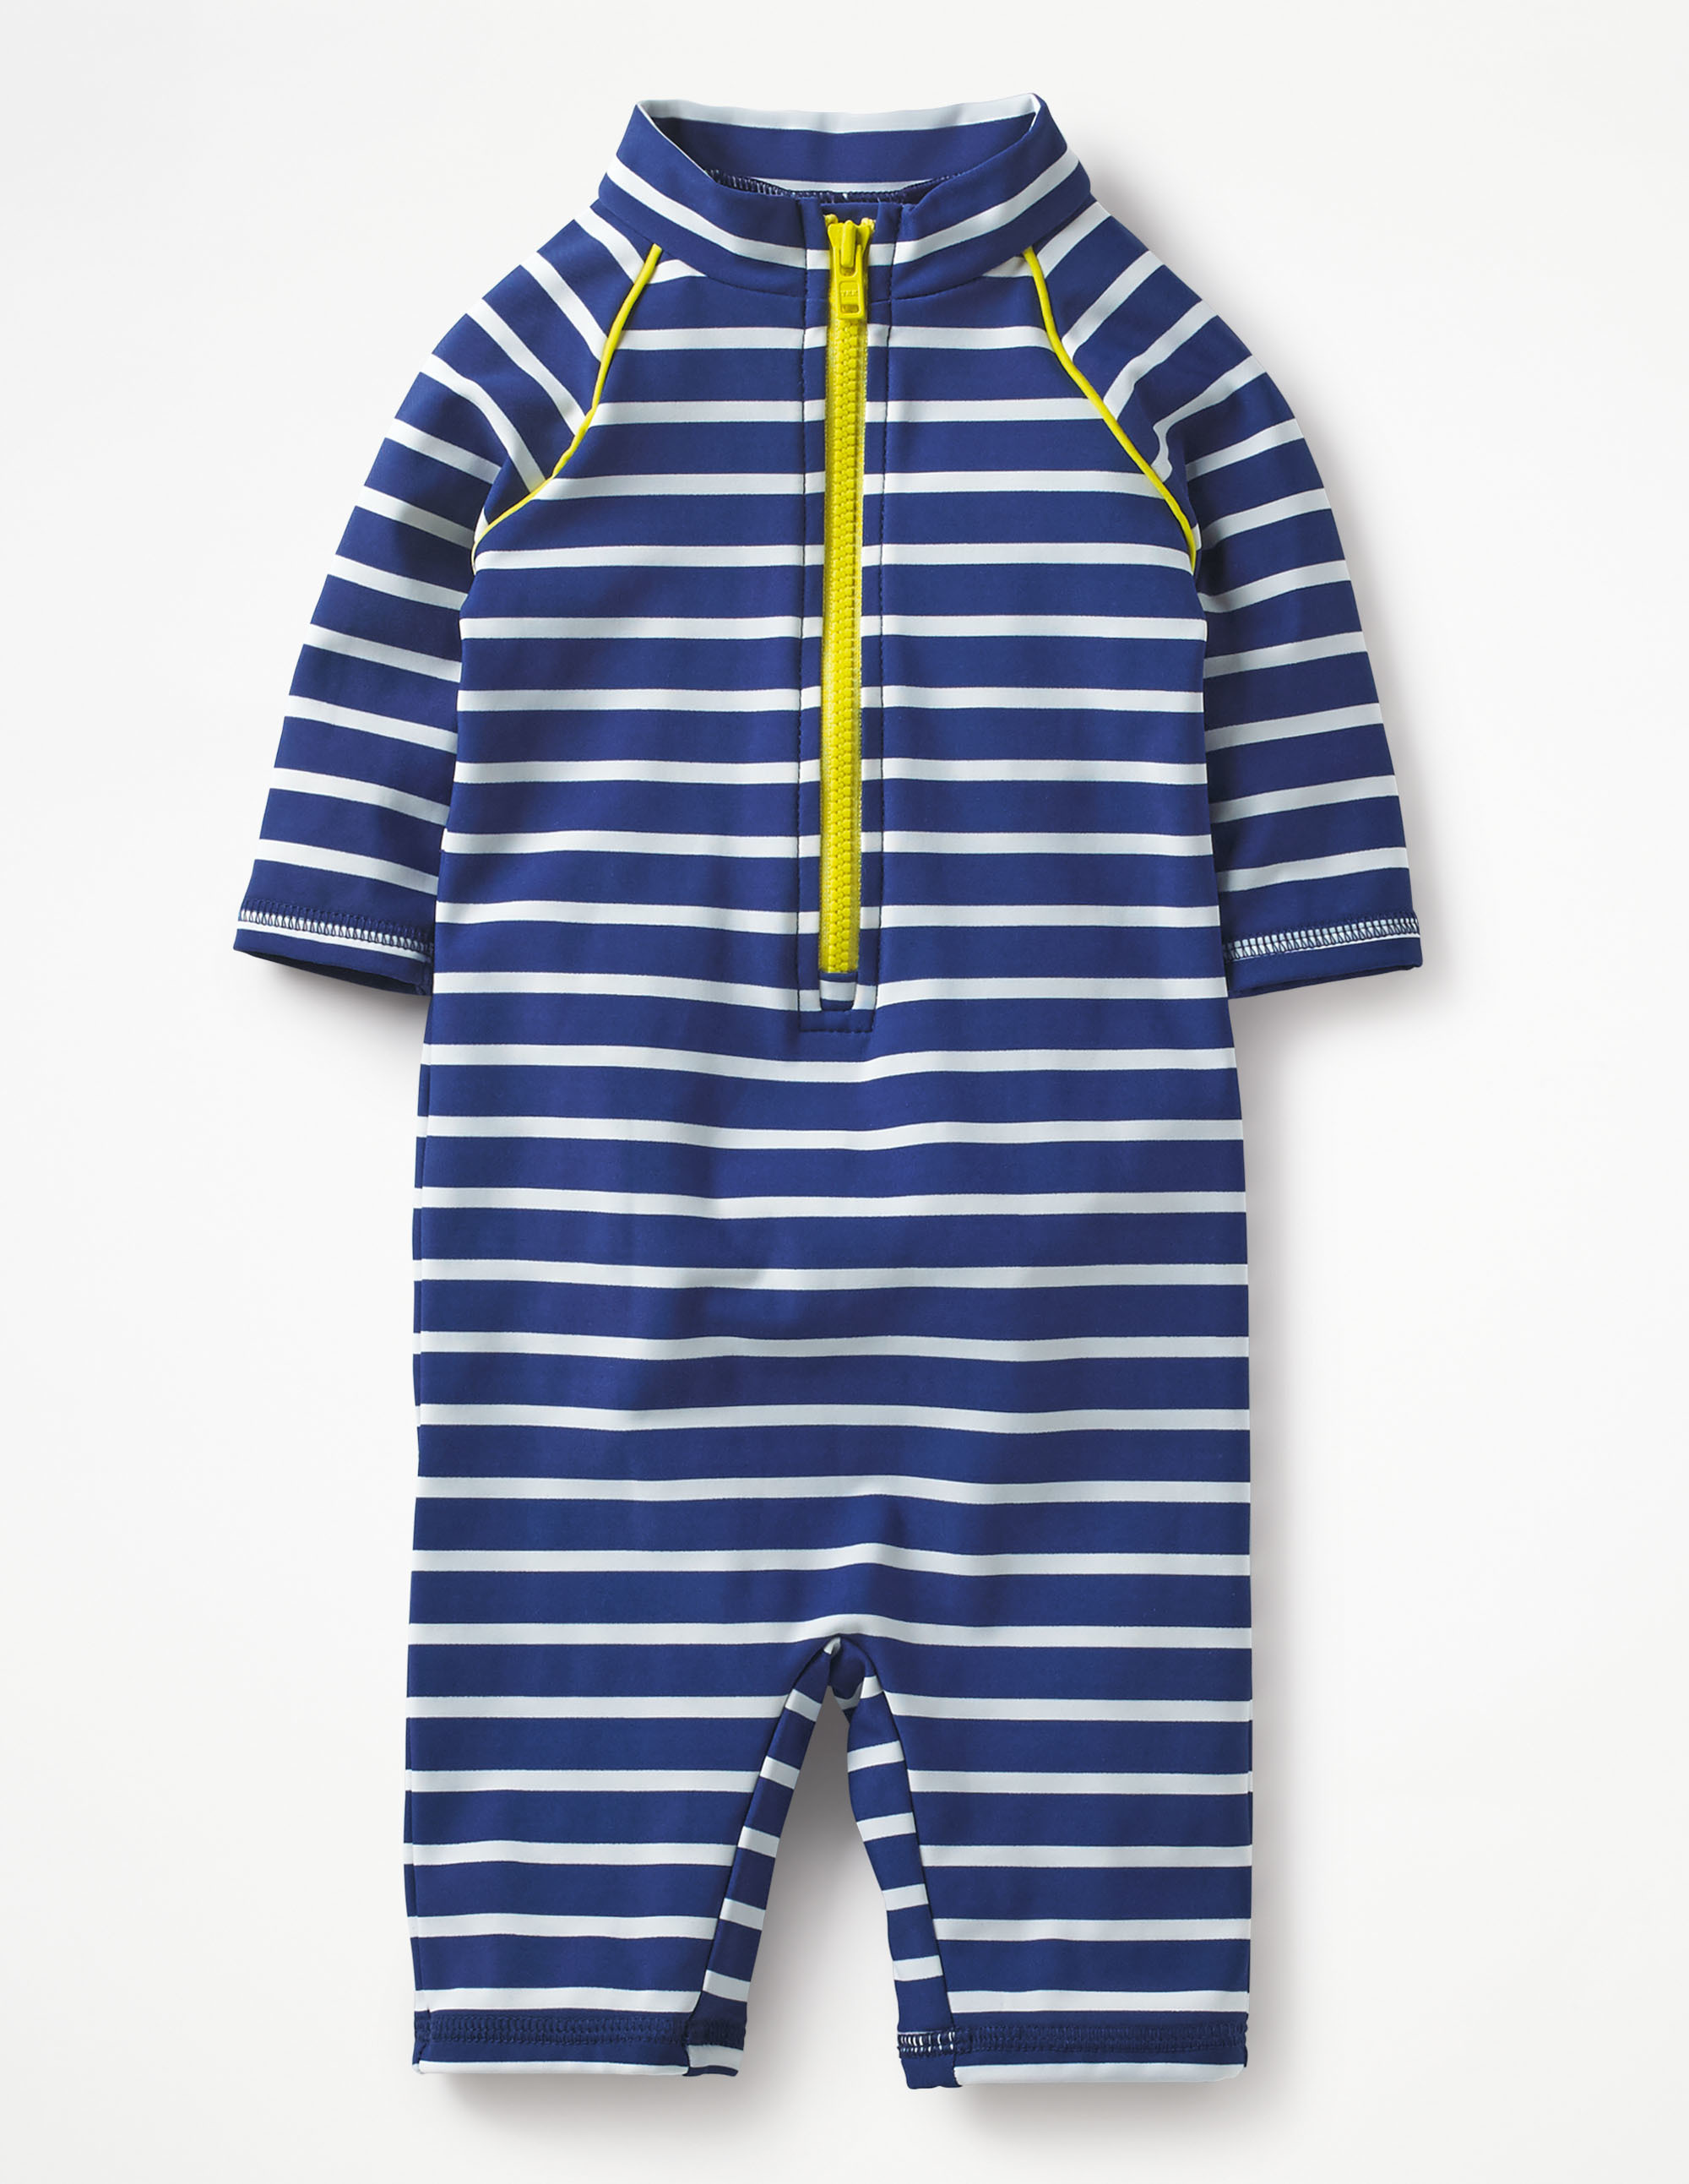 Surf suit by Boden